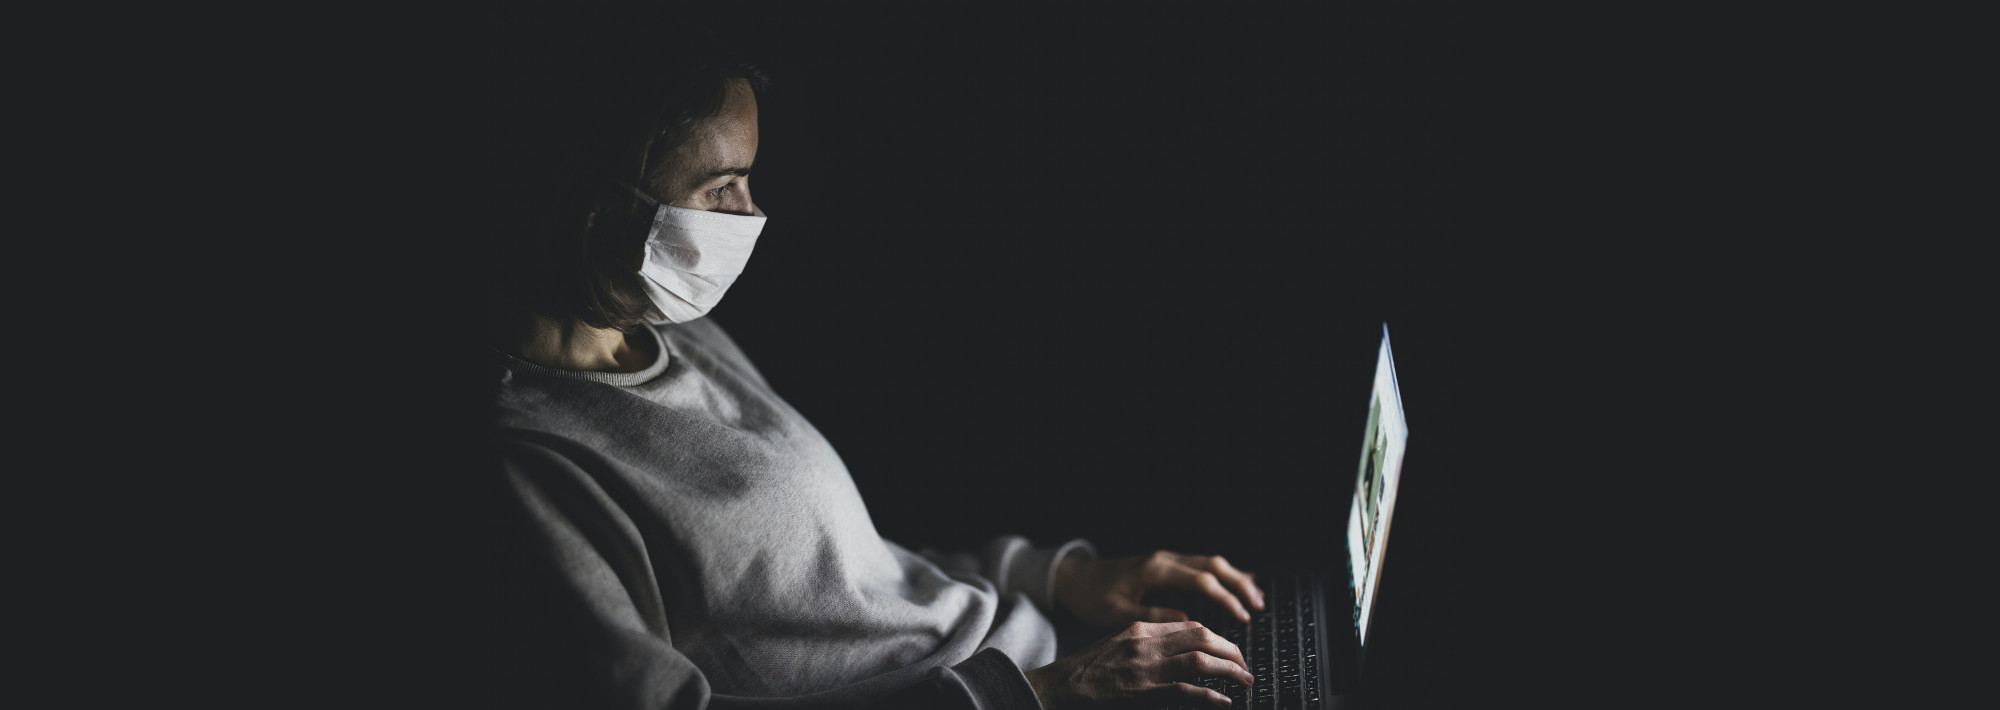 A woman wearing a face mask in a dark room, lit only by a laptop screen